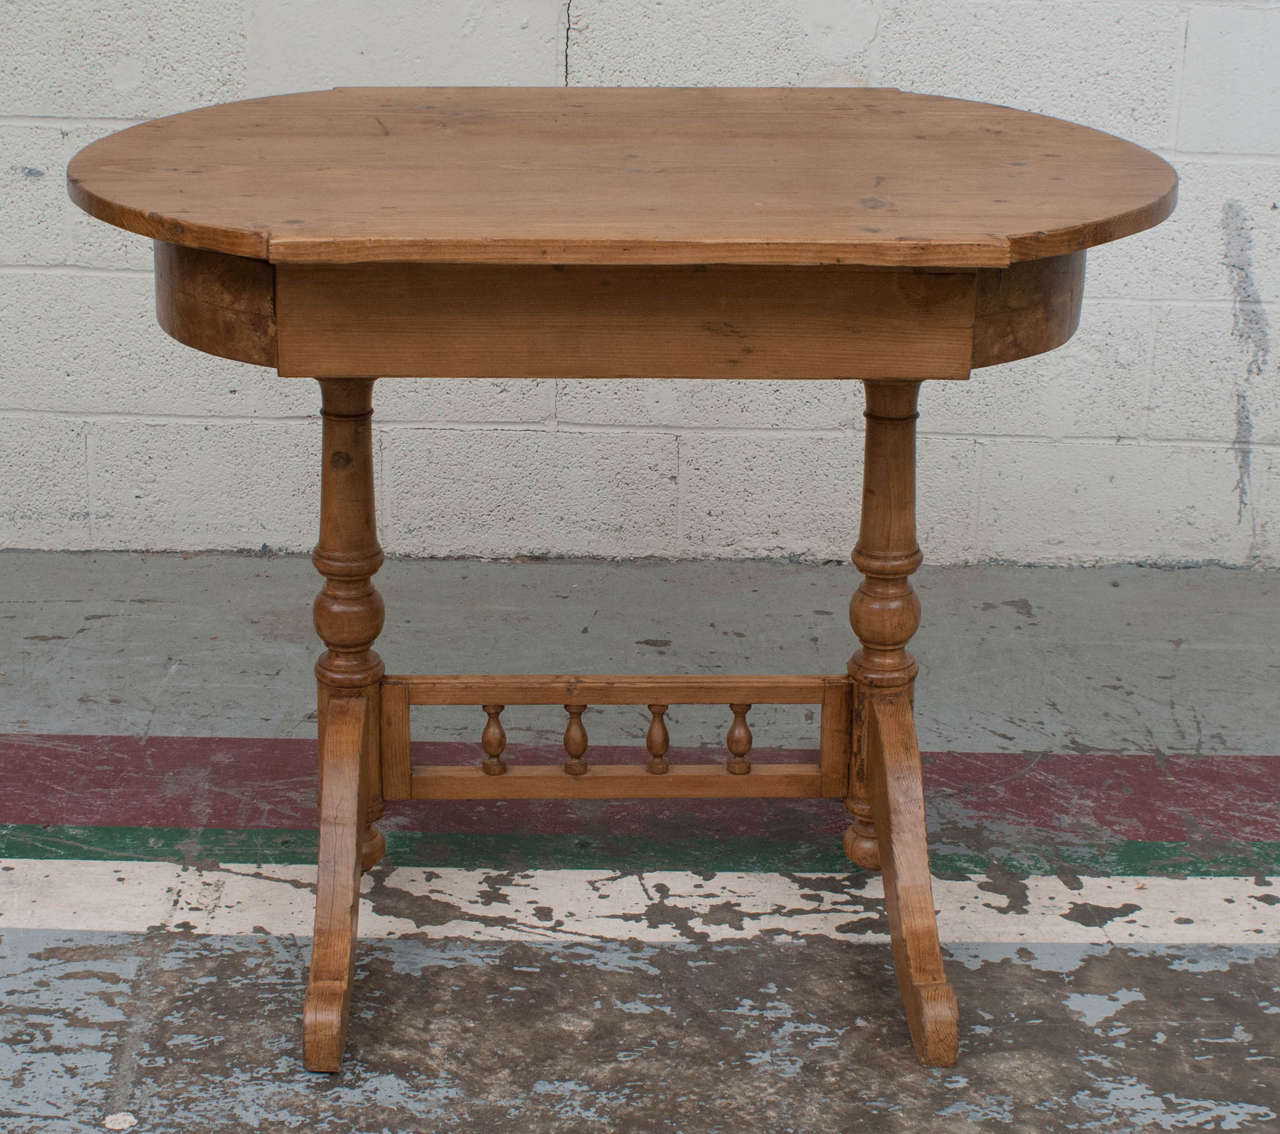 An unusually decorative pine side or center table. The stylized oval top is supported by two trestles, each with a central turned post and two gracefully curved feet, joined by a gallery of turned spindles.